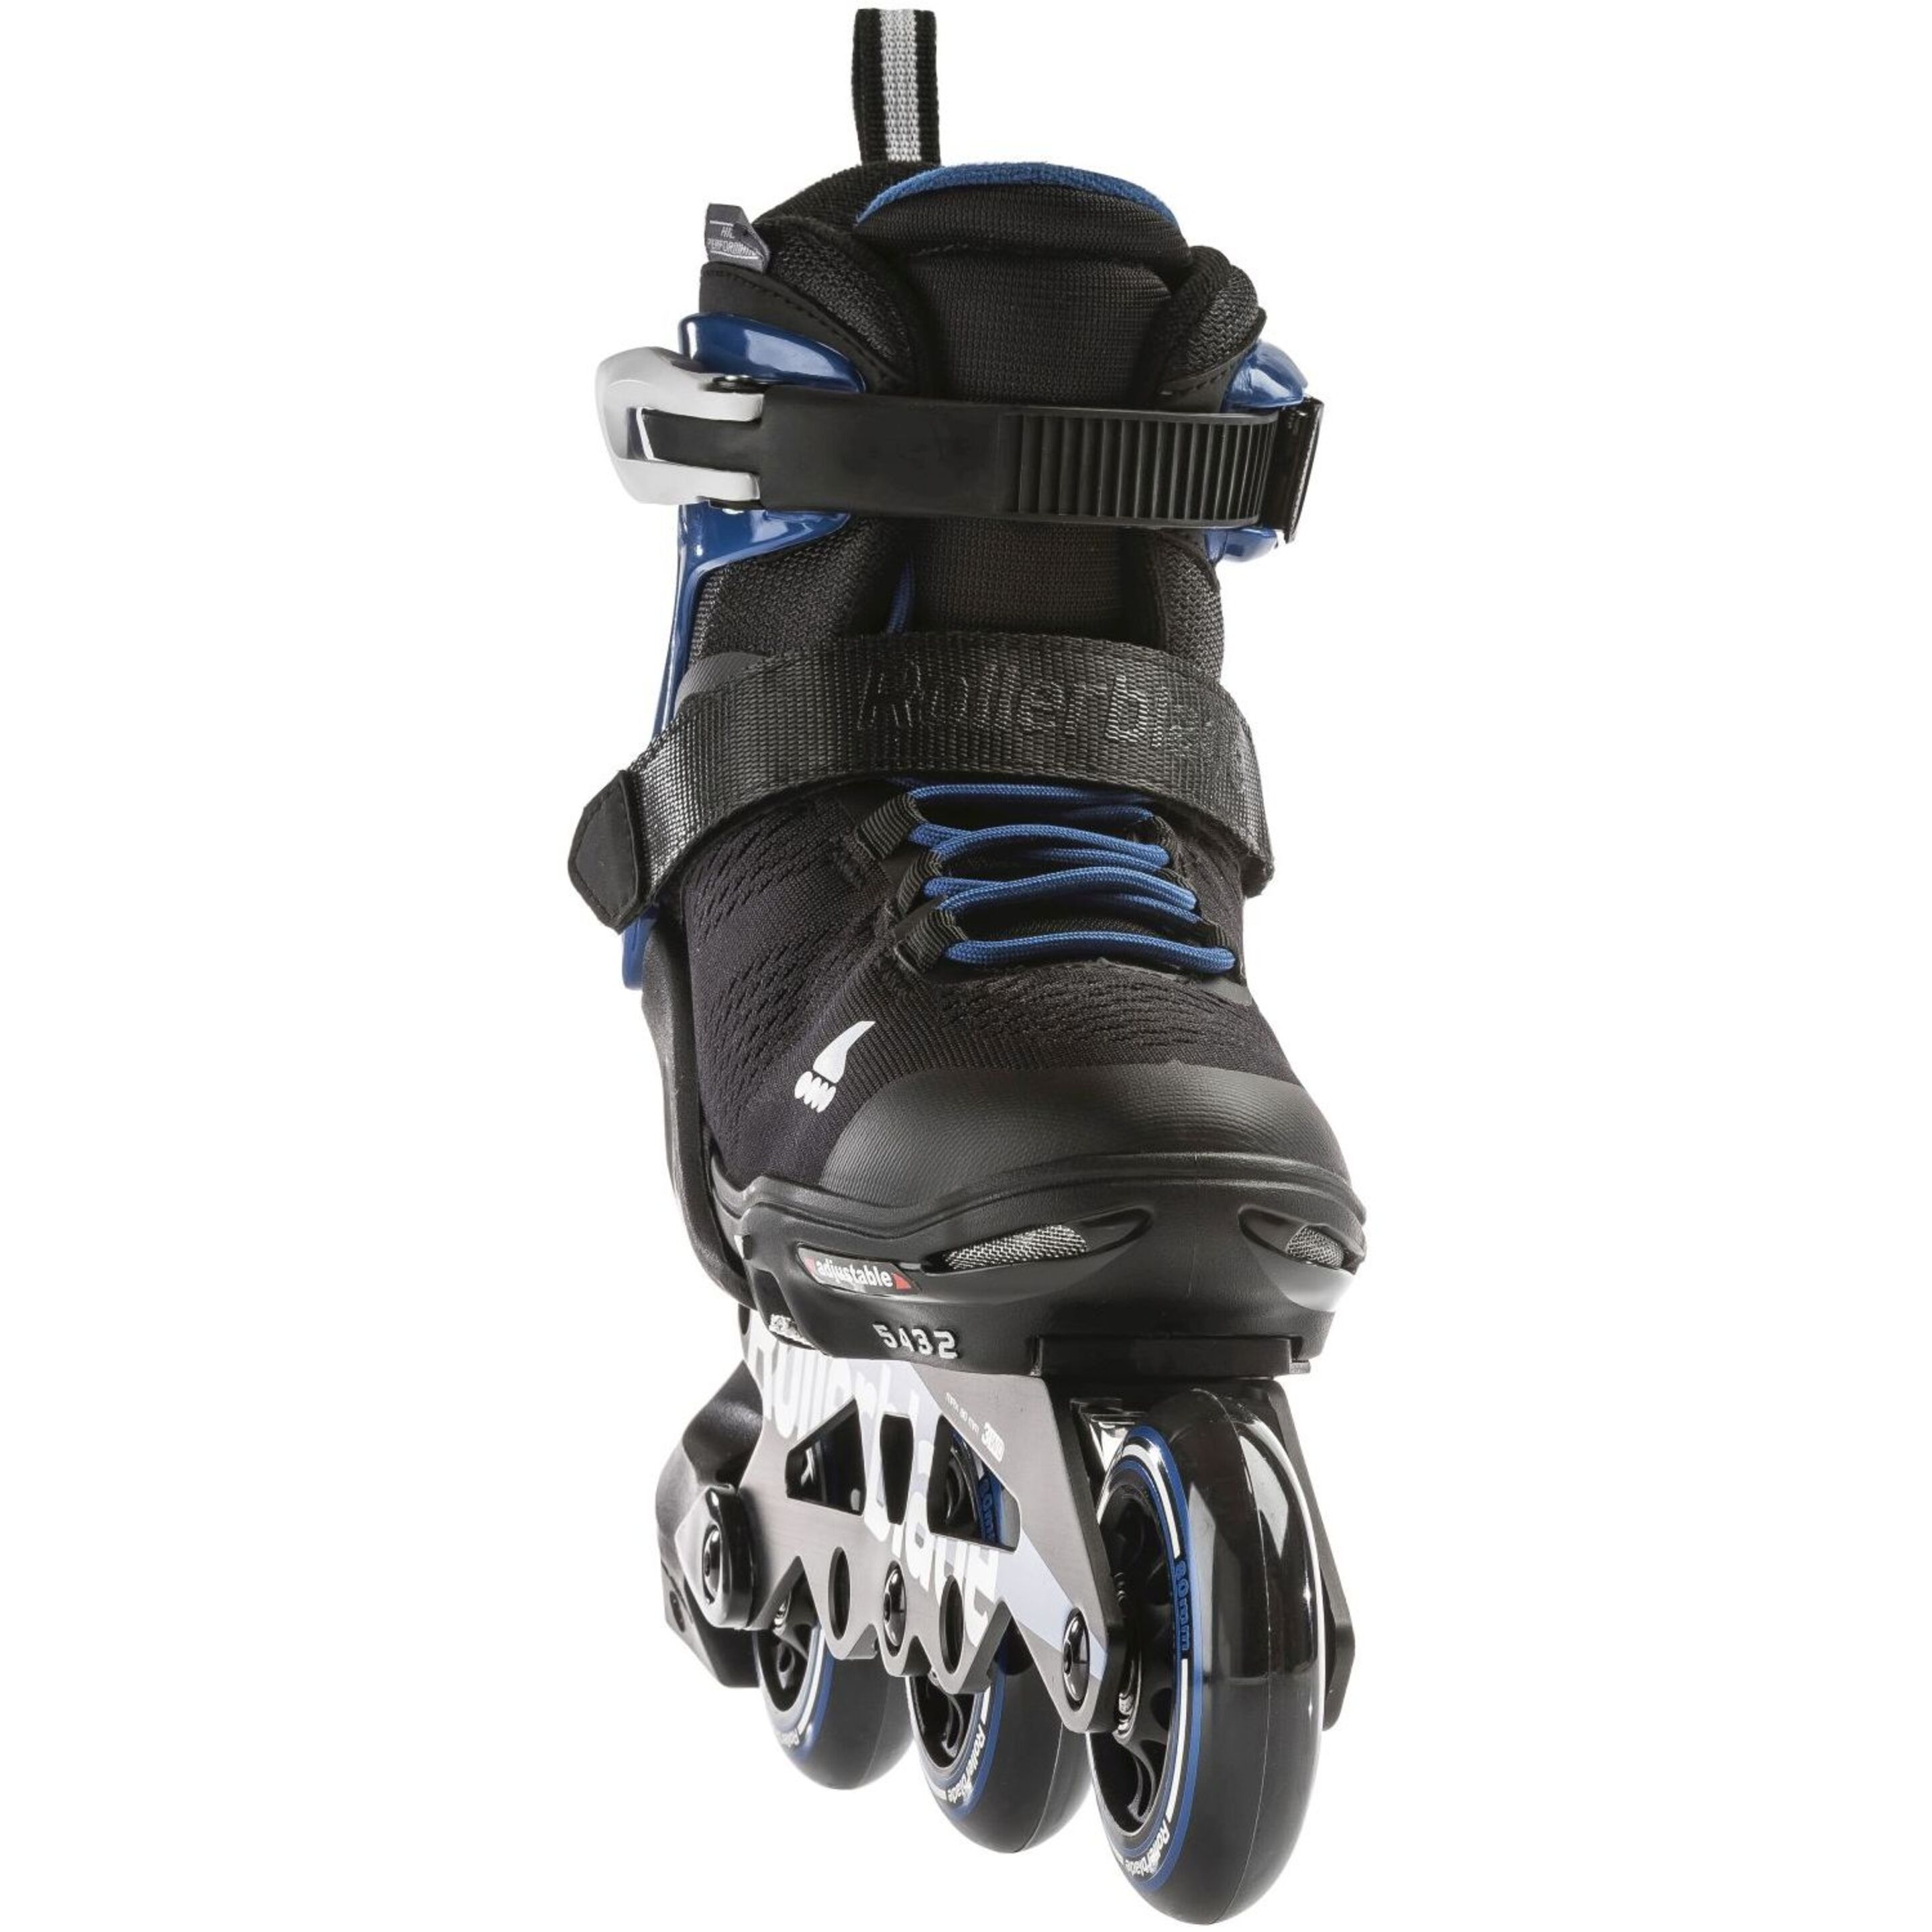 Patines Microblade Alu 3wd Rollerblade